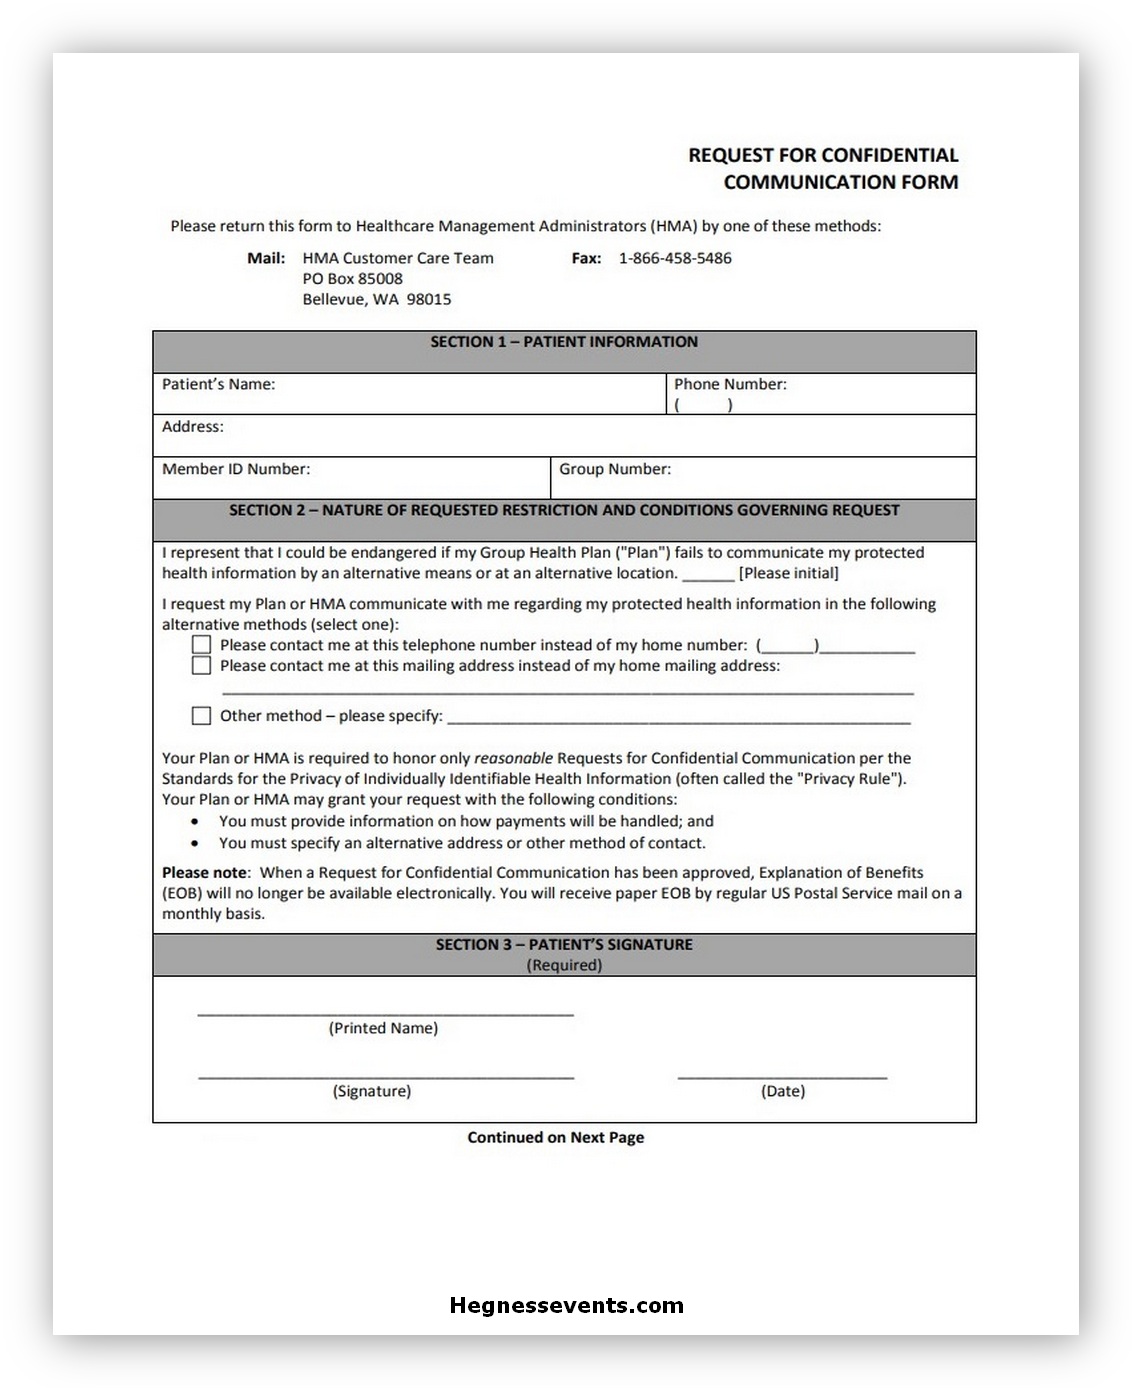 Request for Confidential Communication Form